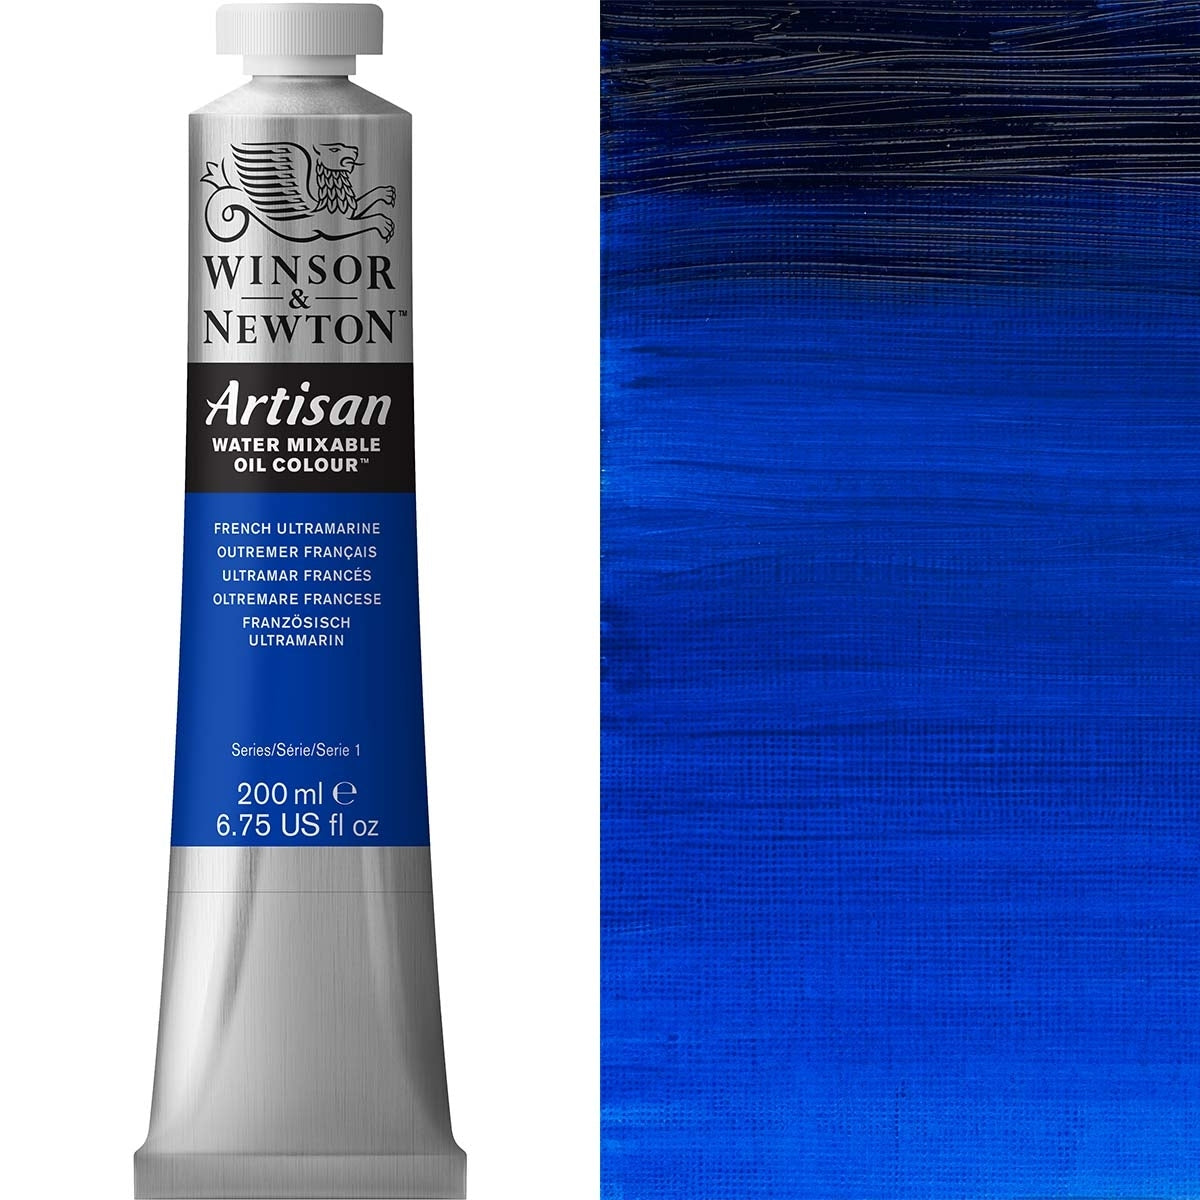 Winsor and Newton - Artisan Oil Colour Watermixable - 200ml - French Ultramarine